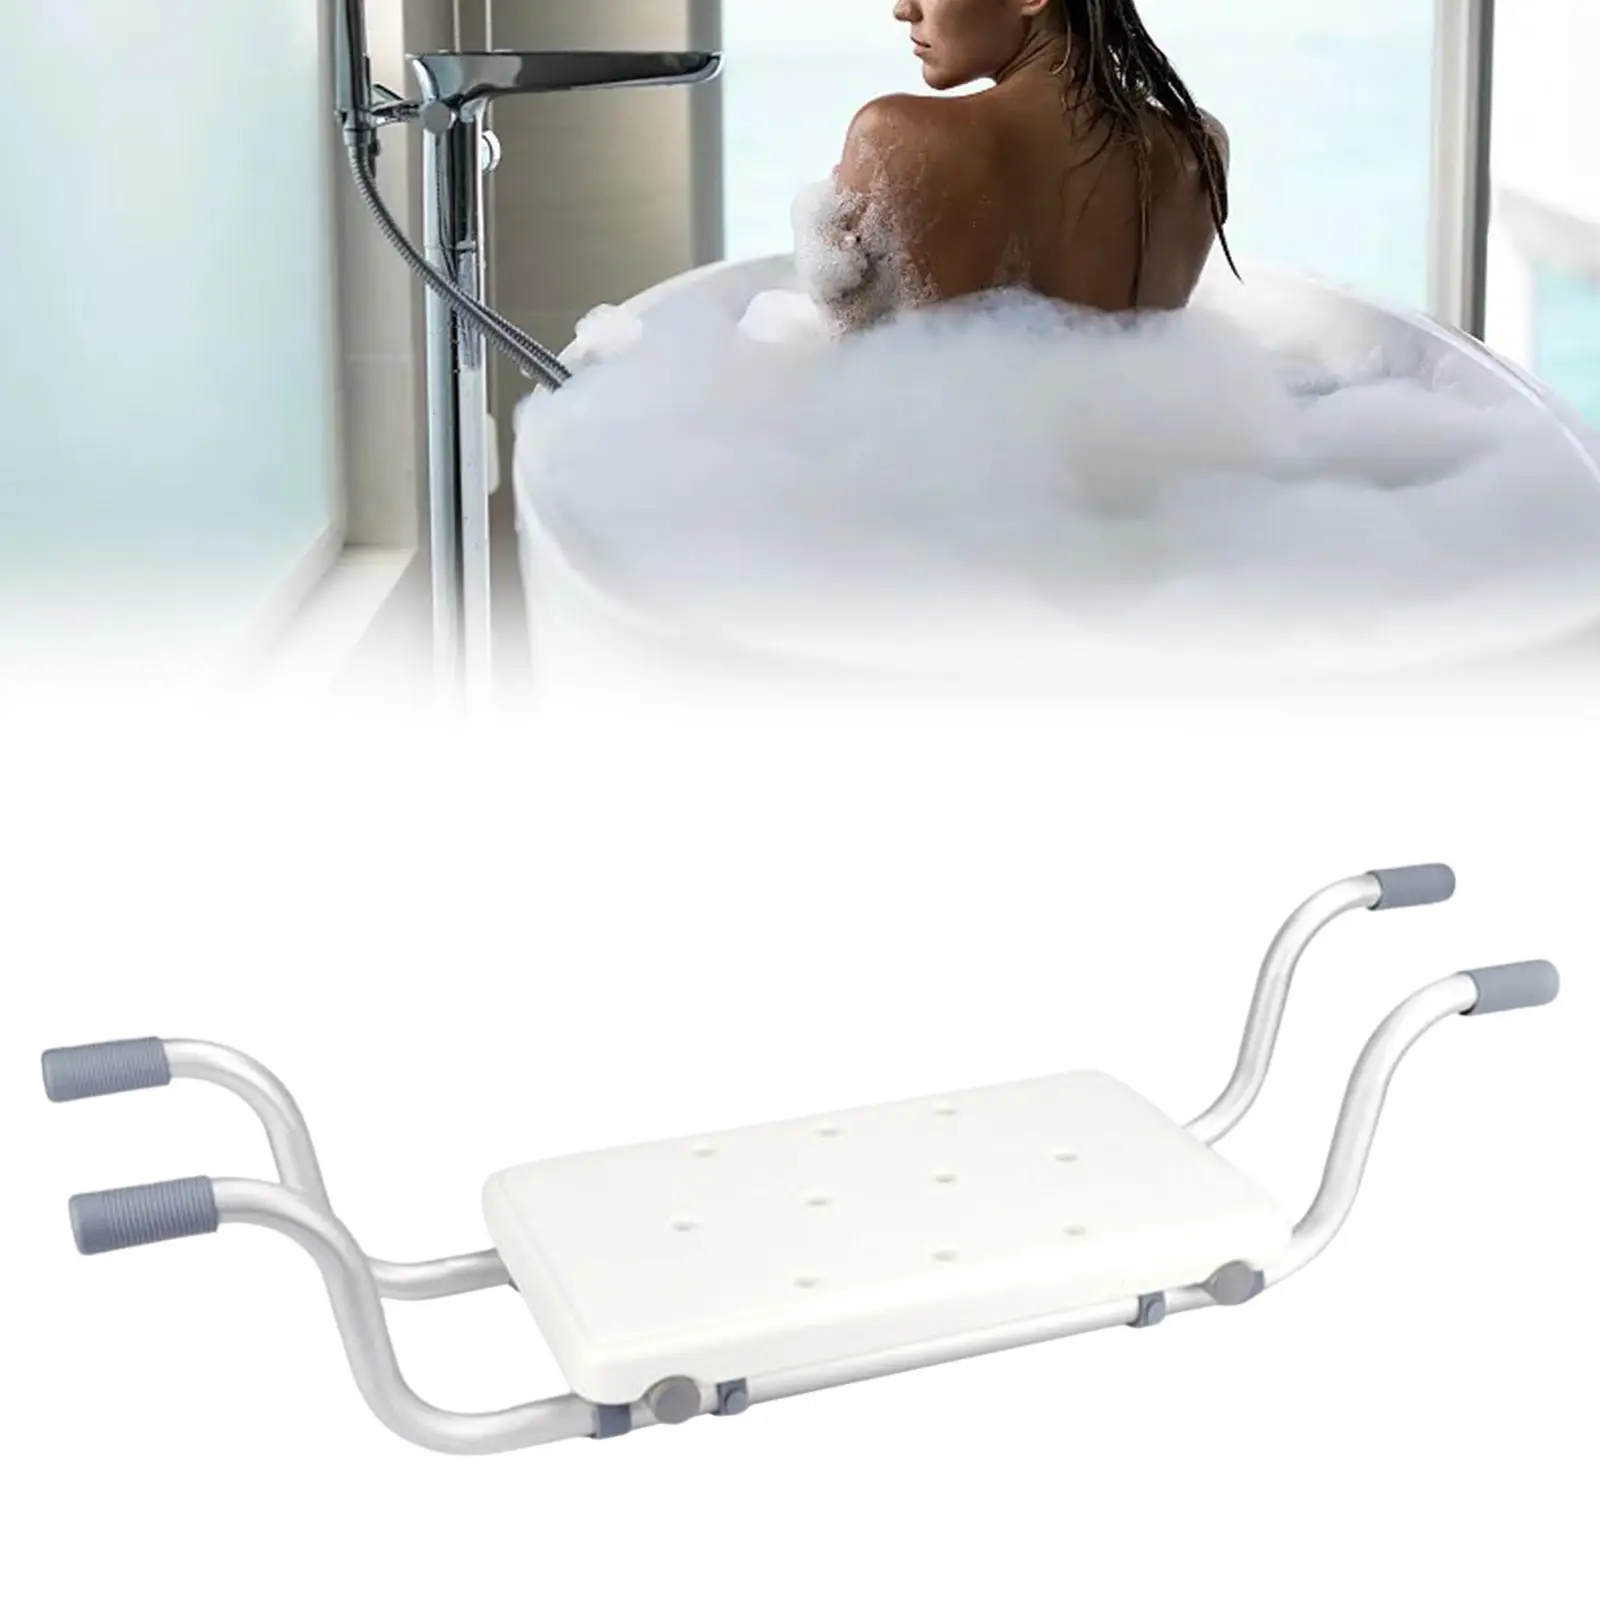 Bath Bench up to 130kg Weight Non Slip Transfer Bench Bathroom Shower Chair Bathtub Tray for Seniors Injured Easy Assembly White